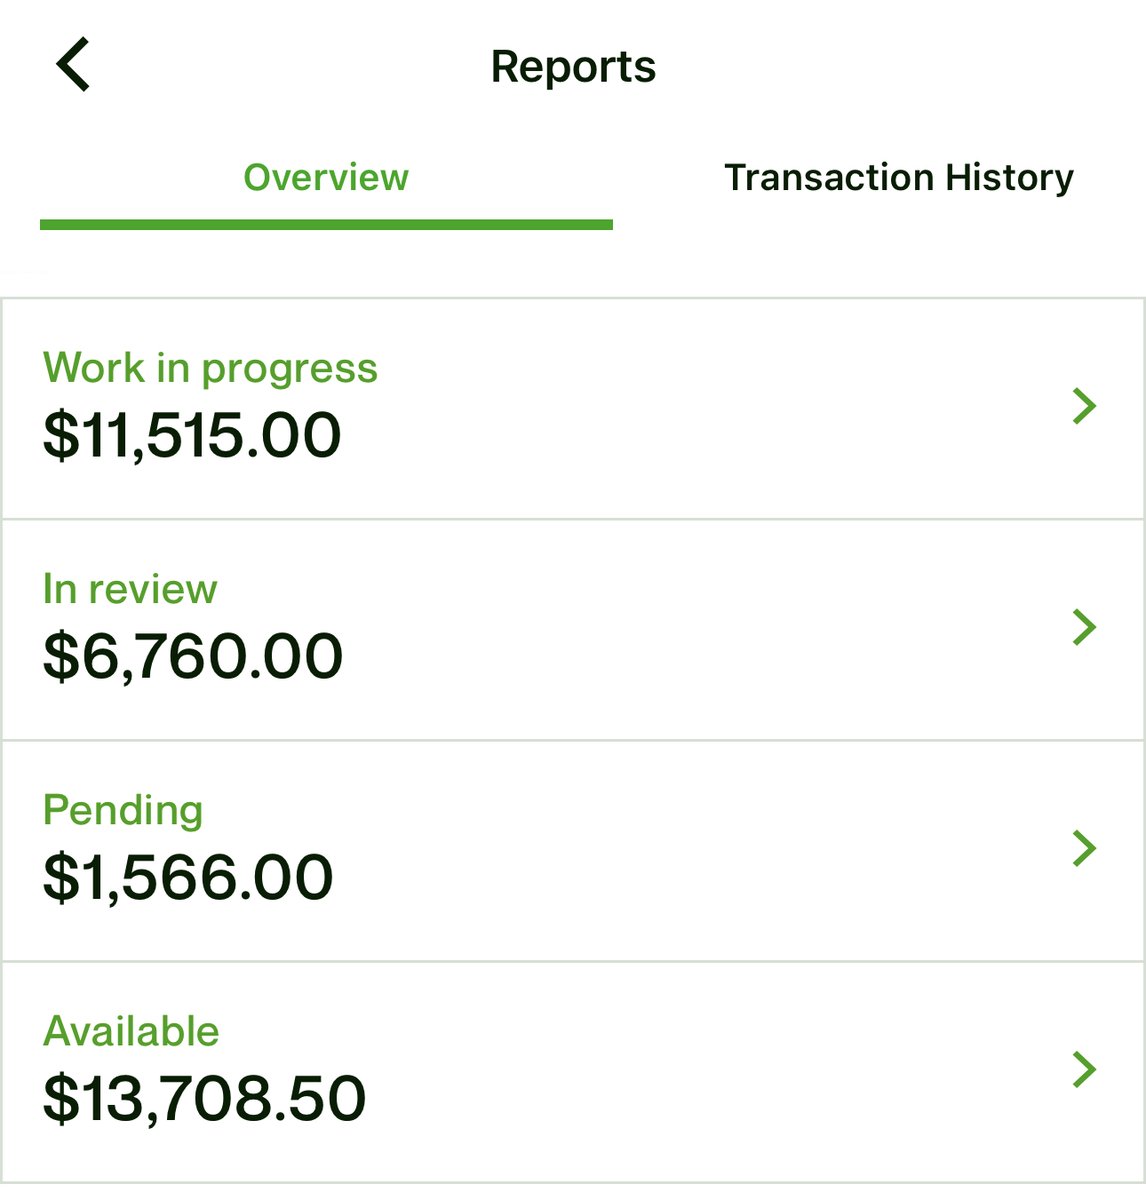 $21,000 from UpWork alone this month.

Stop sleeping on it folks 🧩

Start TODAY, not tomorrow!